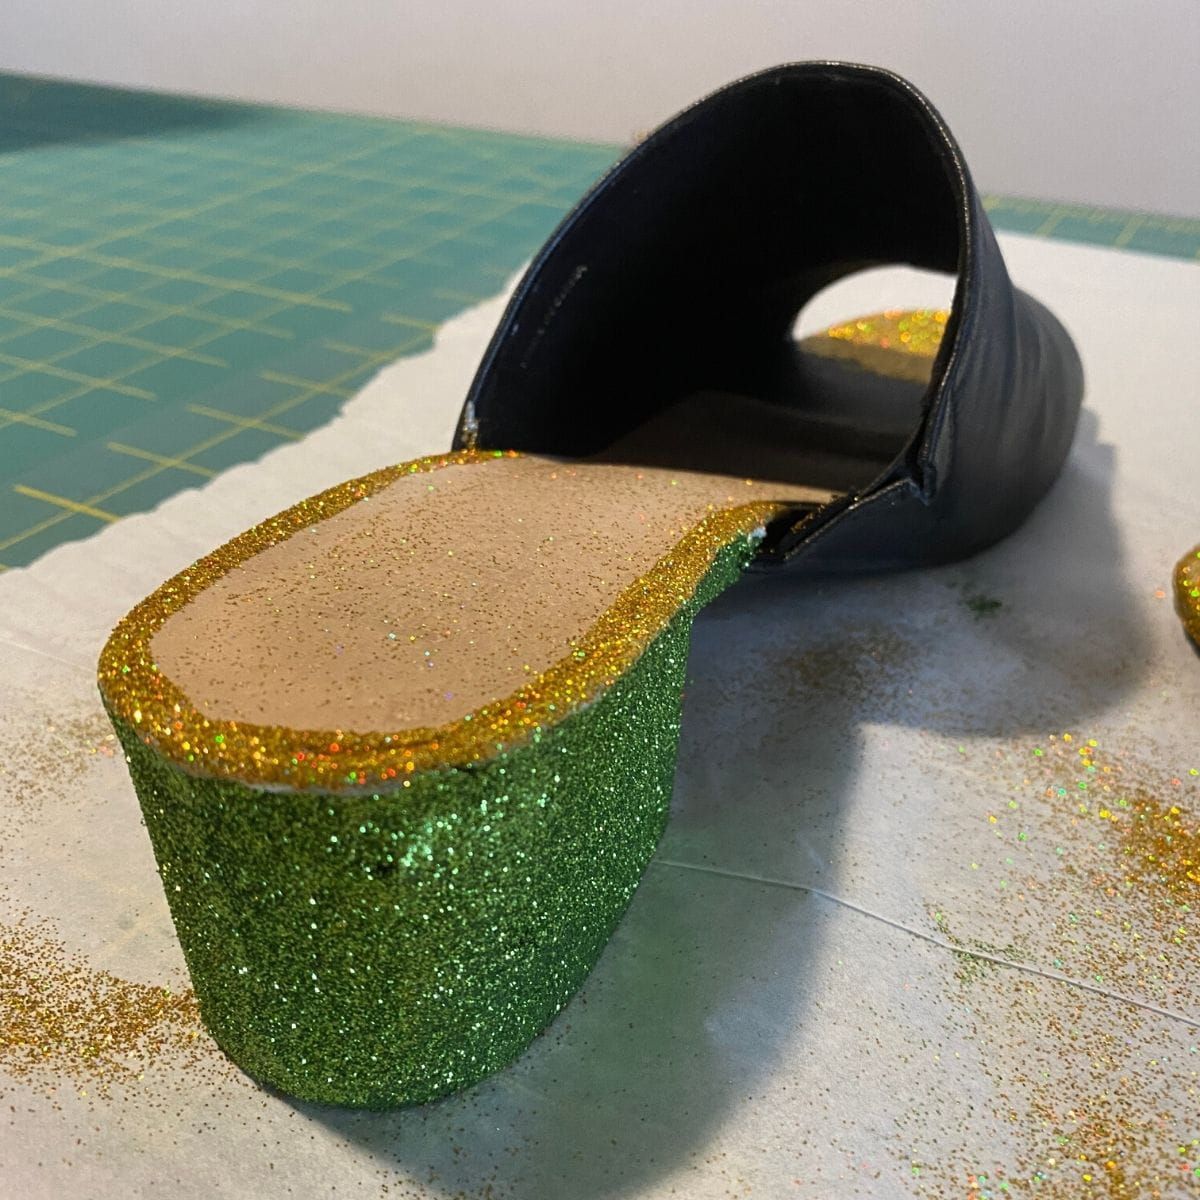 Repairing damaged shoes with mod podge and glitter, step 3